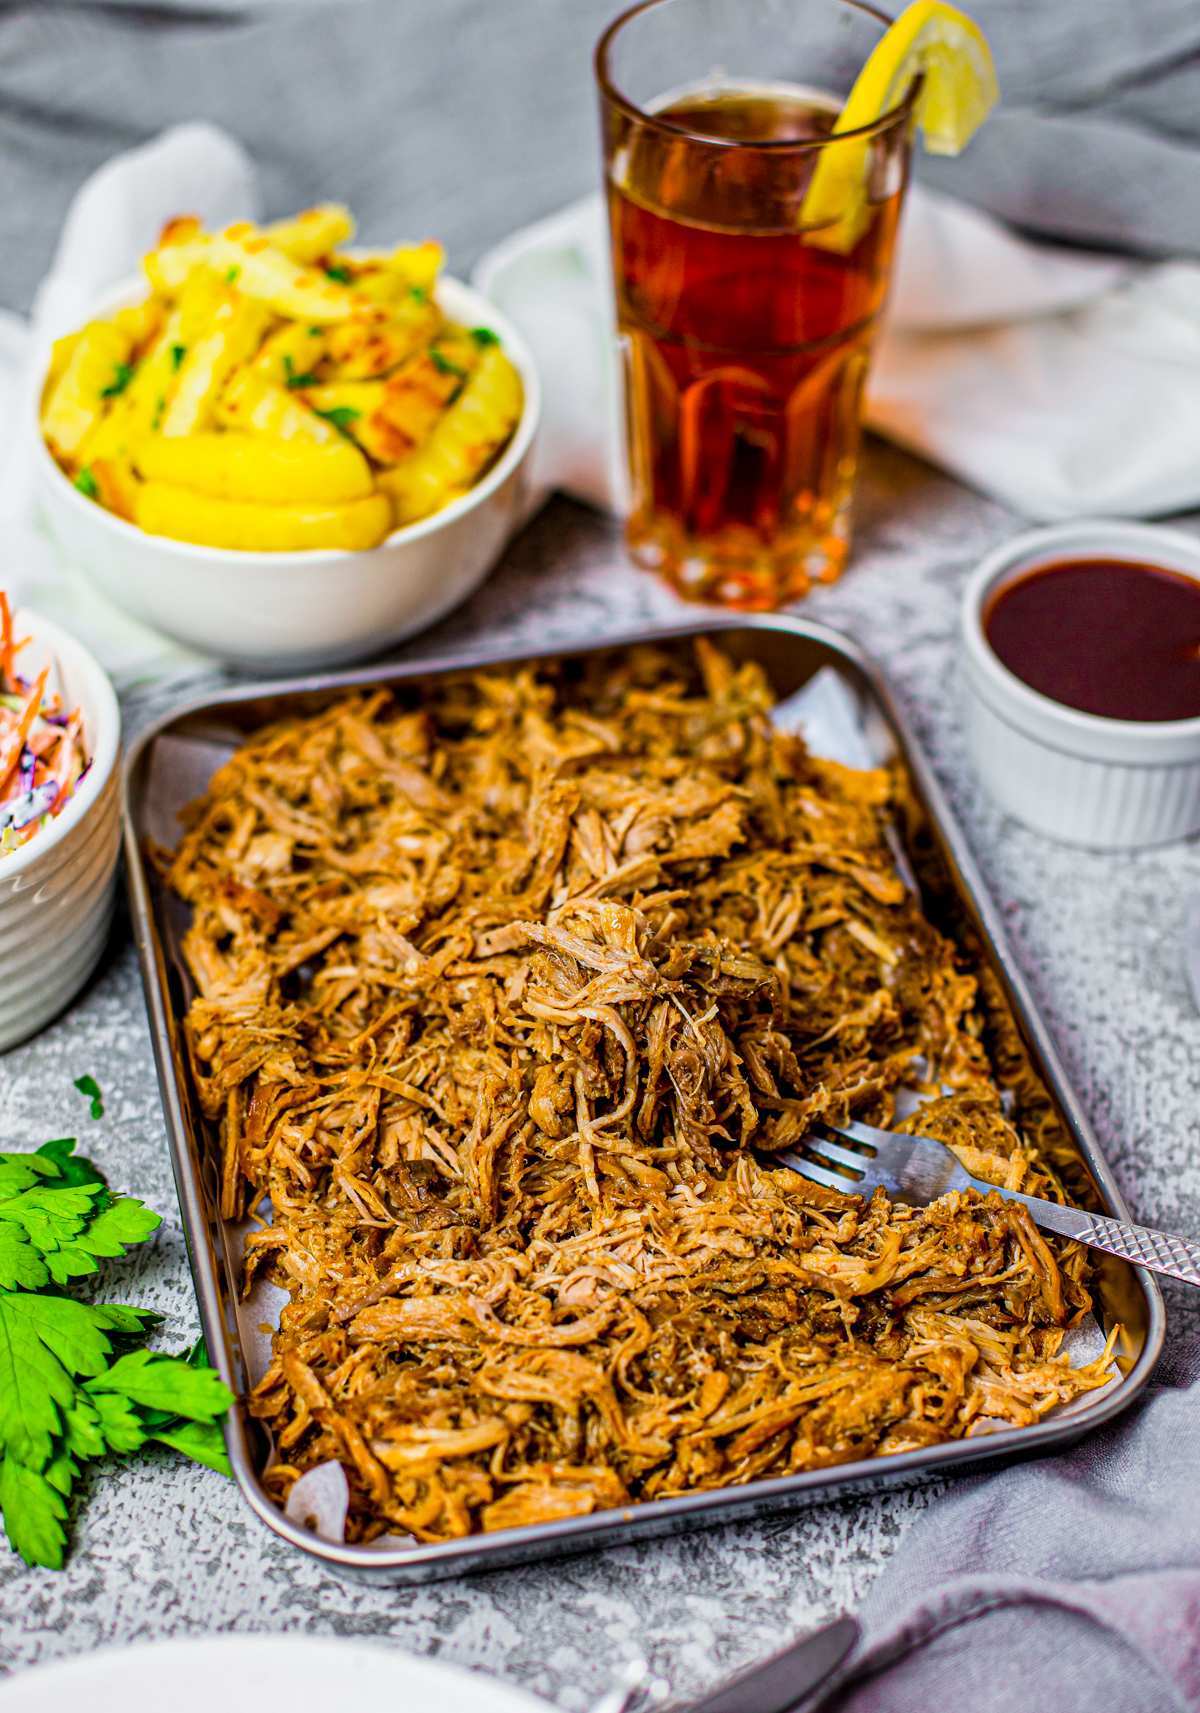 Crock Pot Pulled Pork on tray with form and French fries in bowl